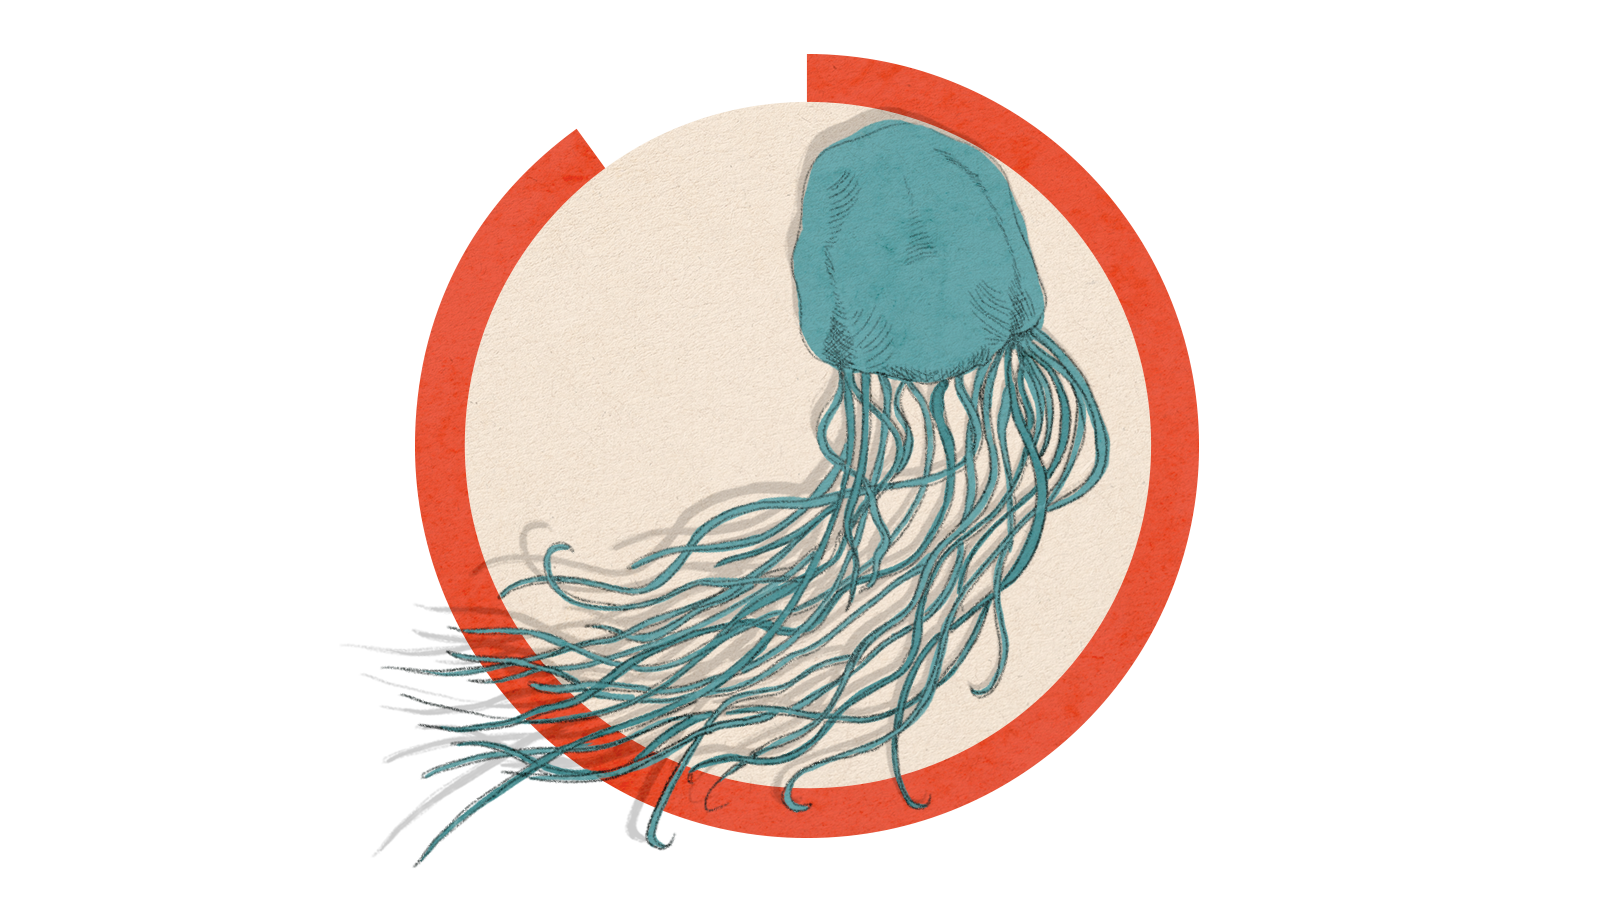 Illustration of a box jellyfish with long tentacles on a circle background.